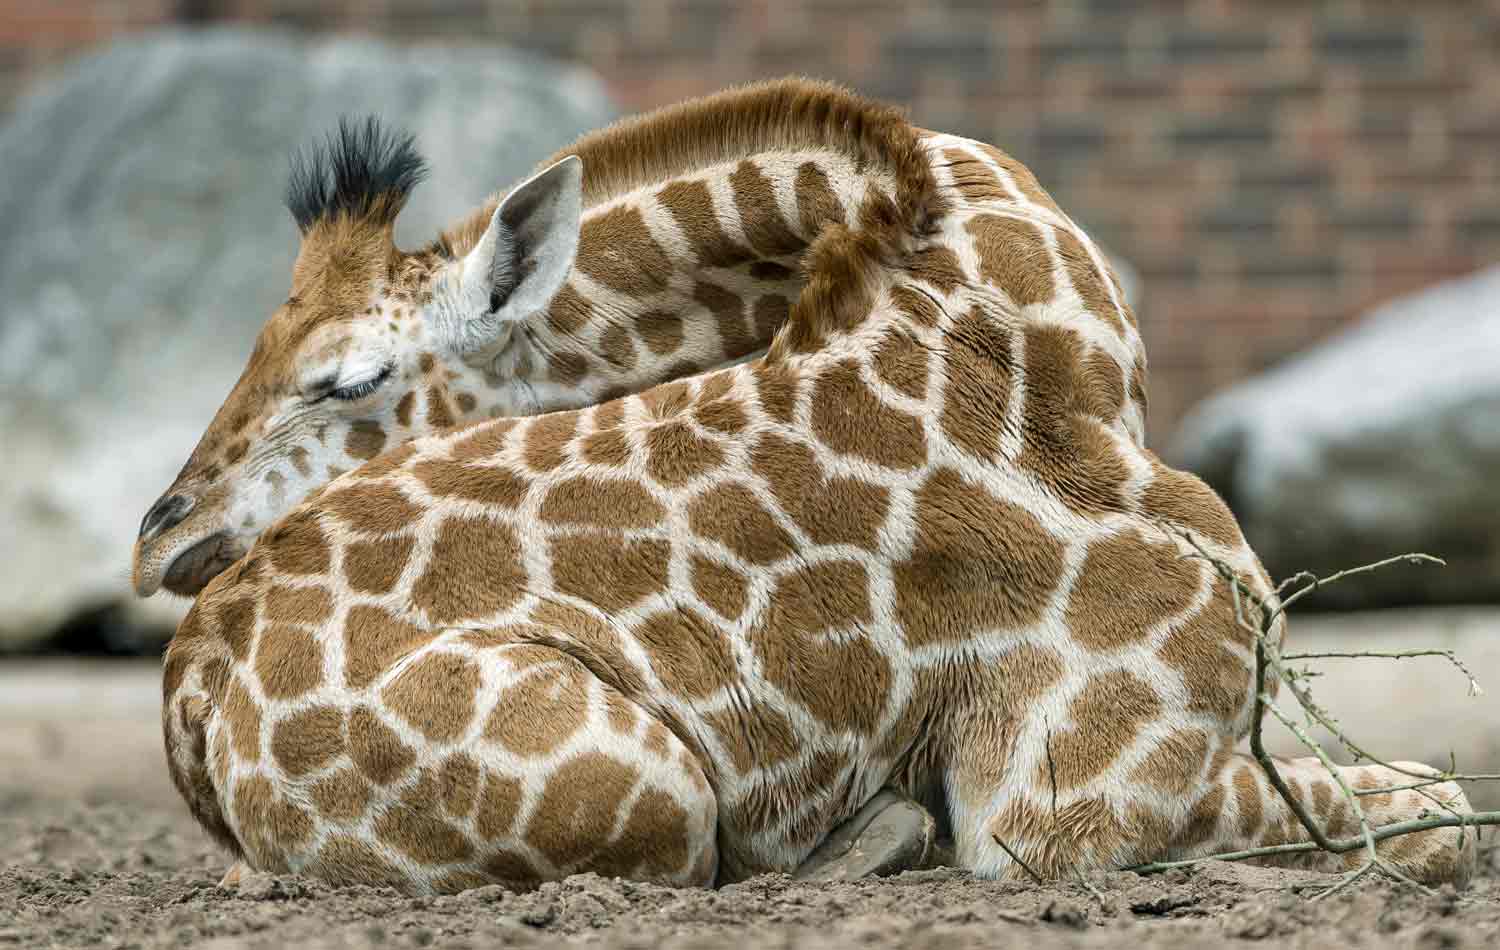 A sleeping giraffe lies on the ground with its neck stretched over its back.